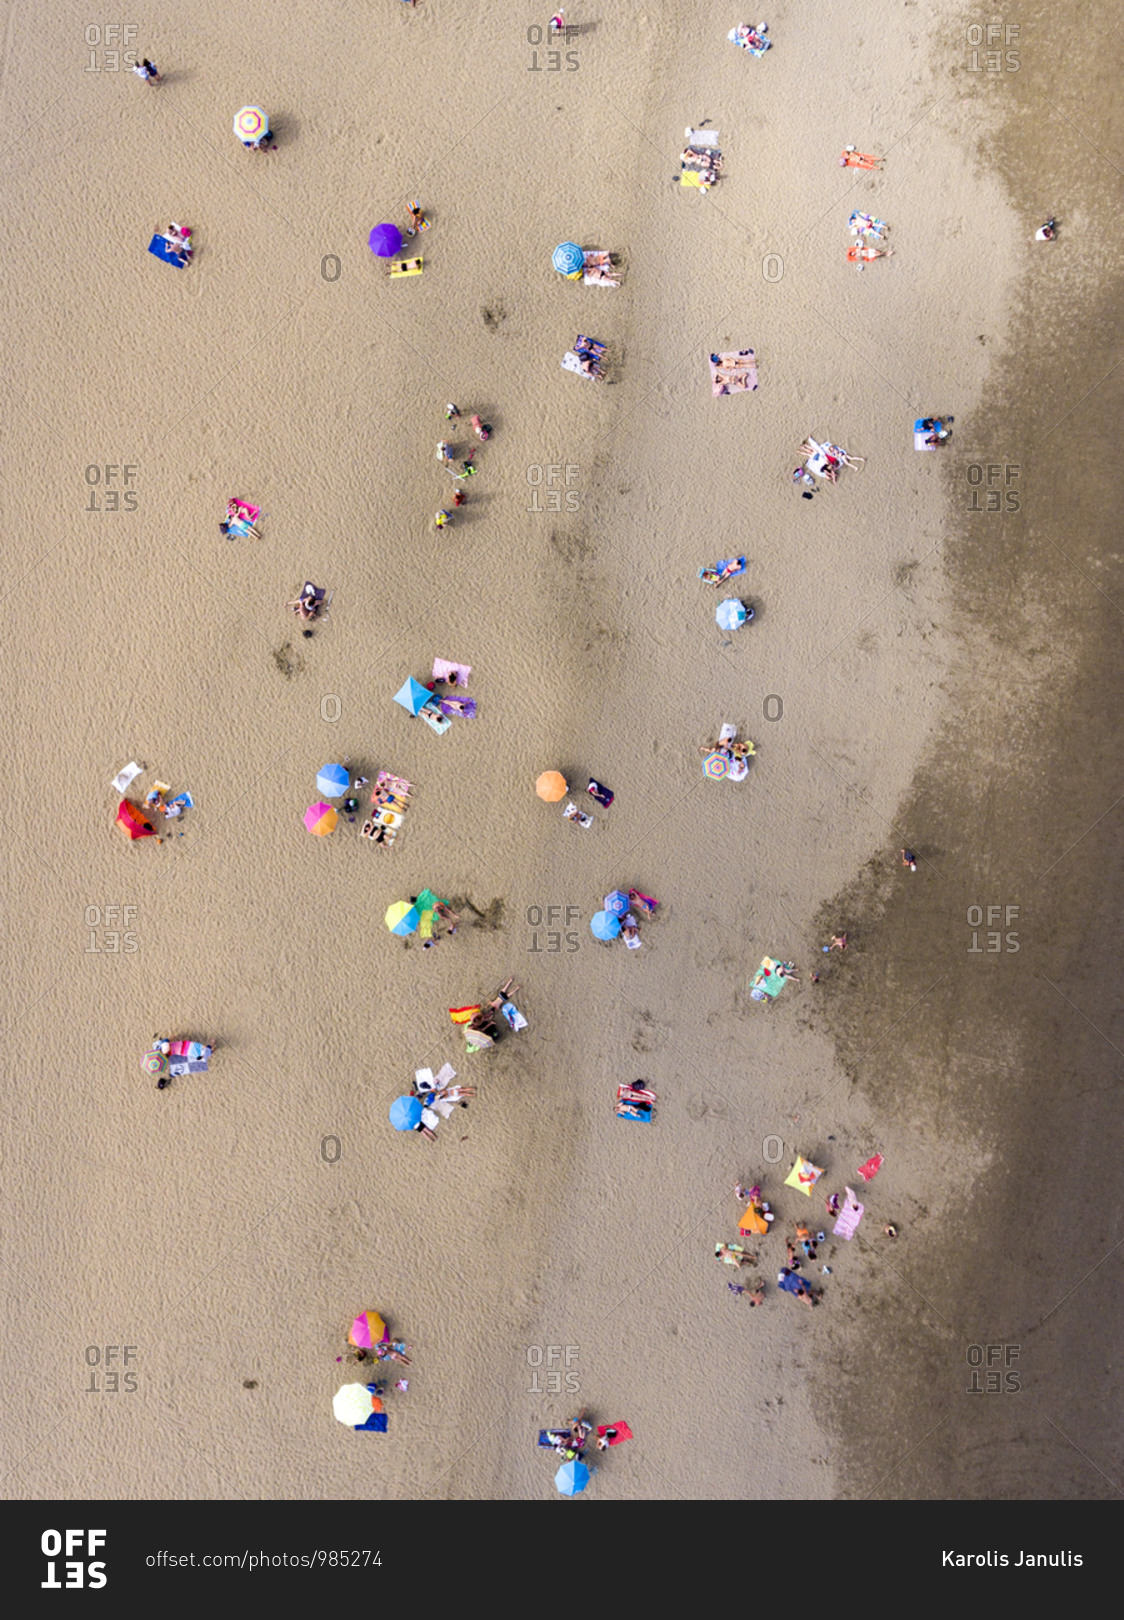 Beach filled with people and colorful umbrellas from a bird's eye view